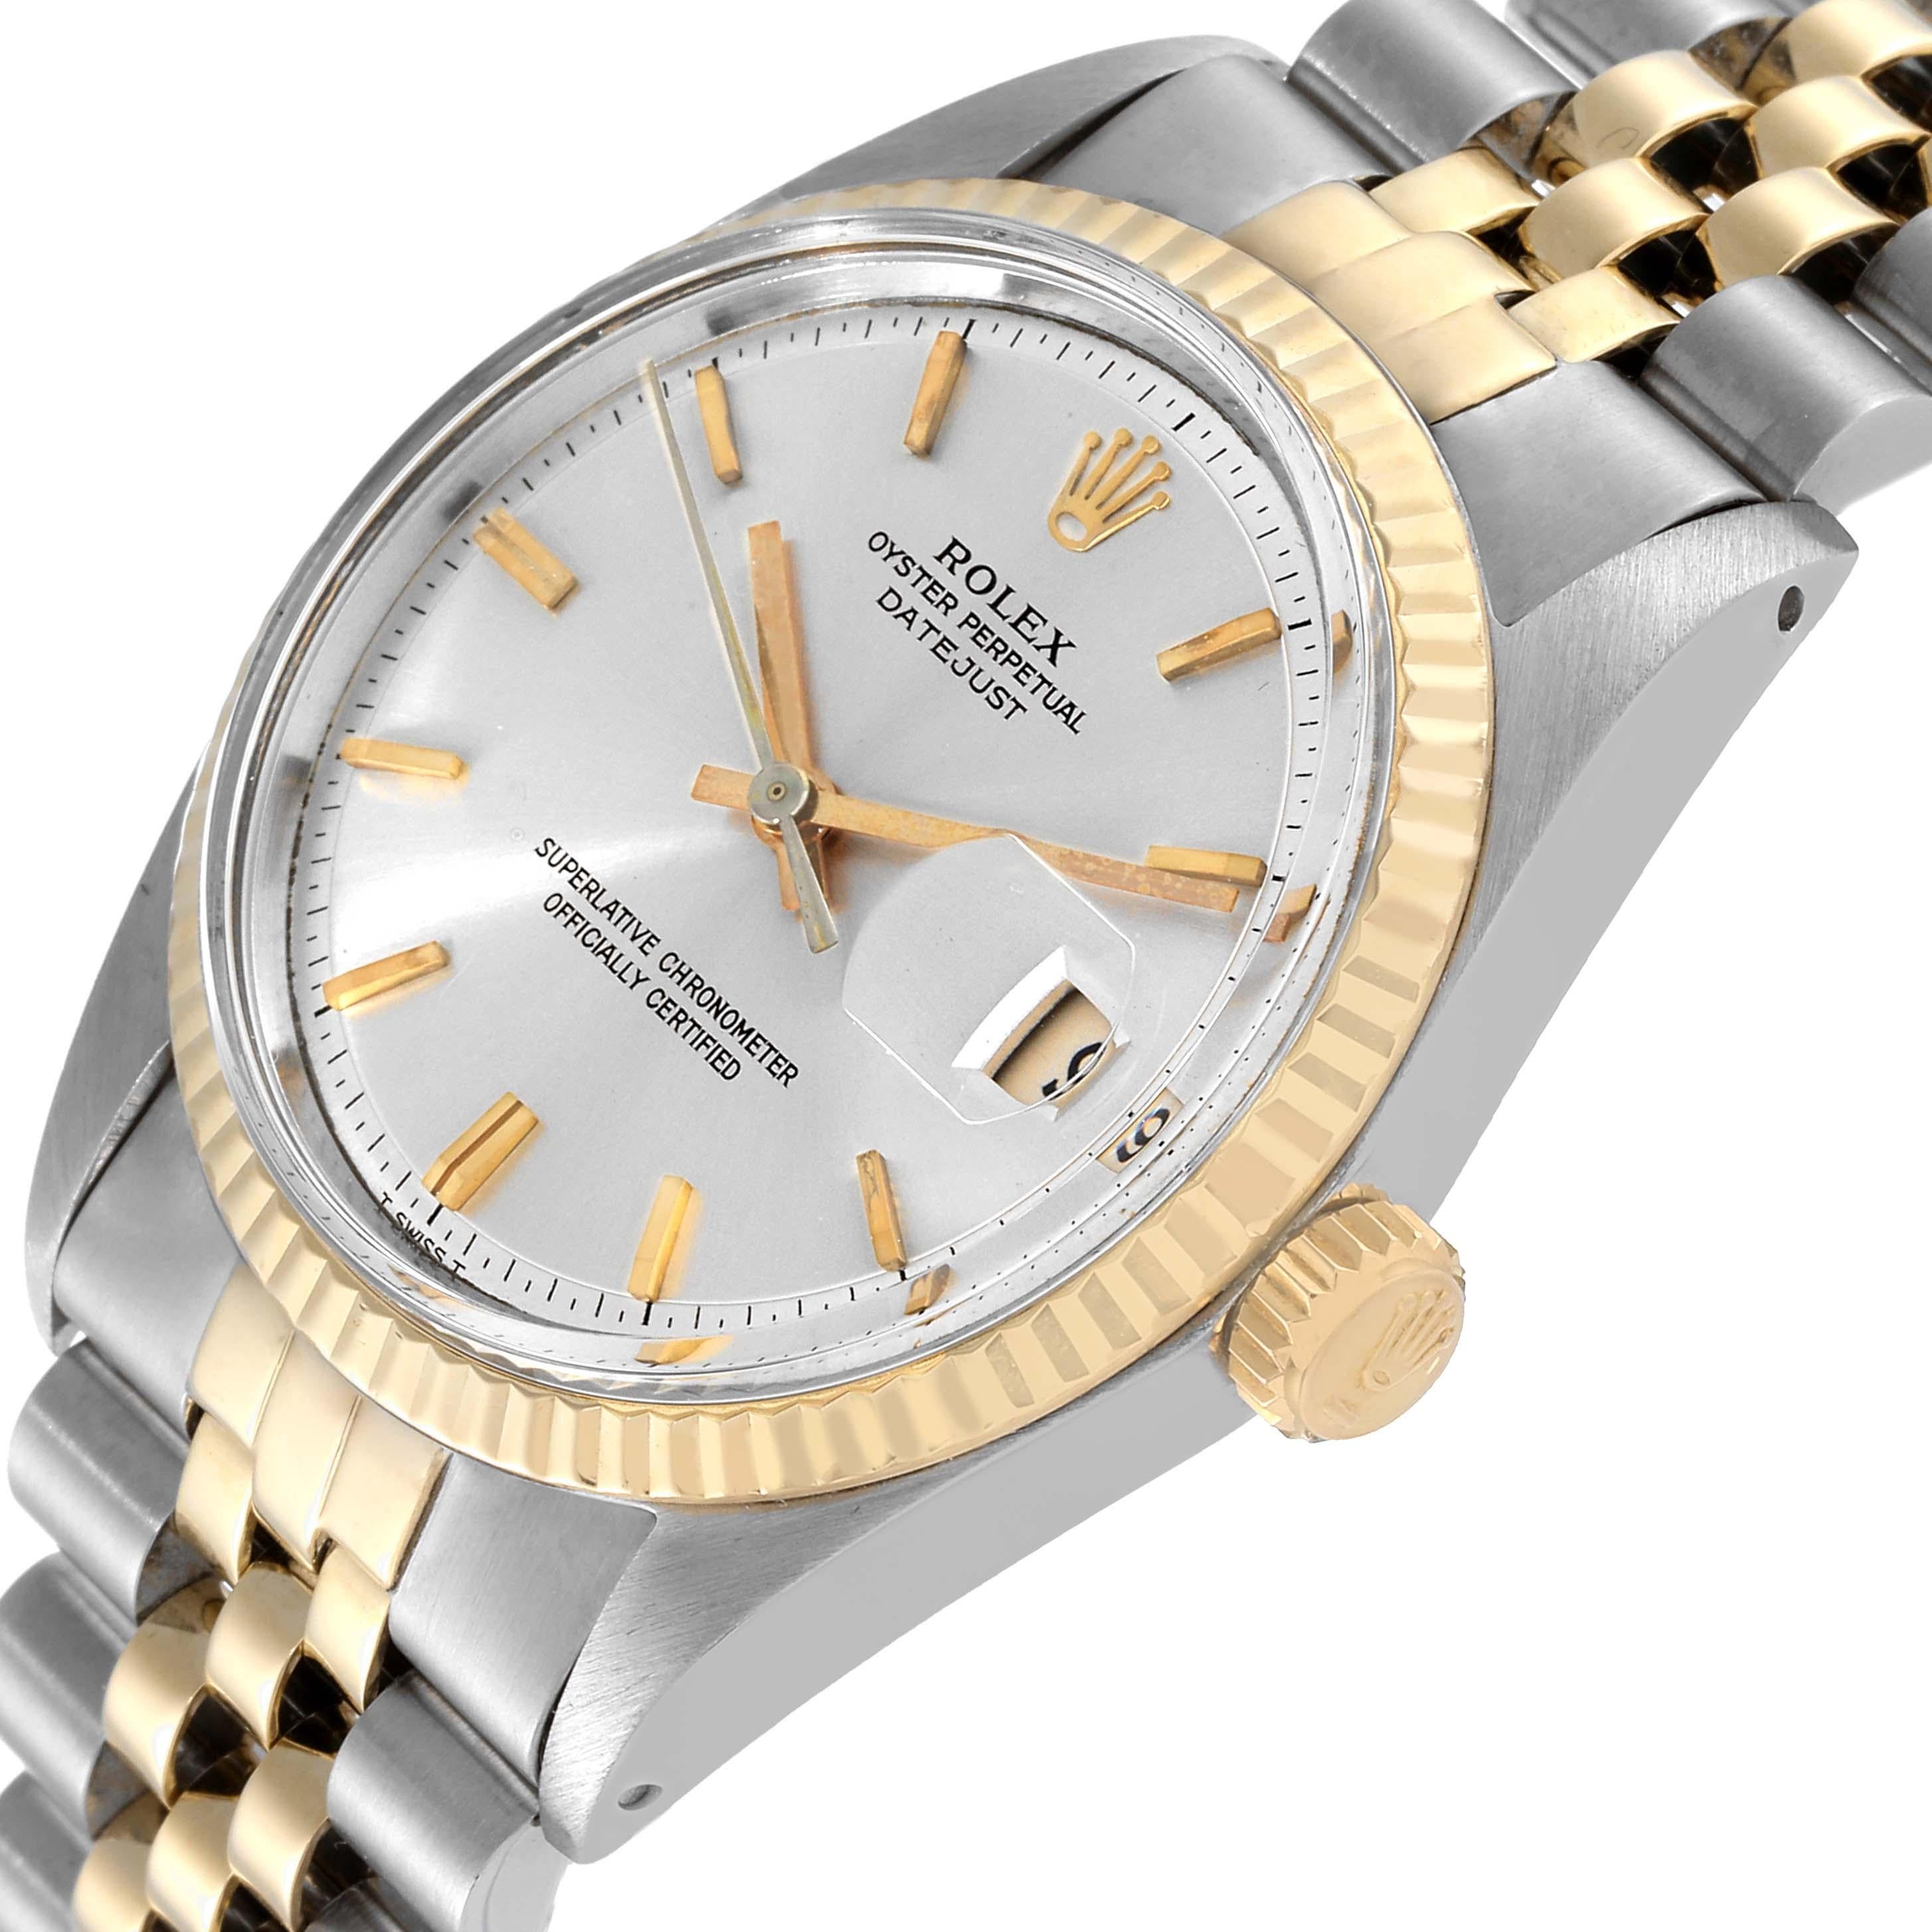 Rolex Datejust Steel Yellow Gold Silver Dial Vintage Mens Watch 1601 Box Papers 1